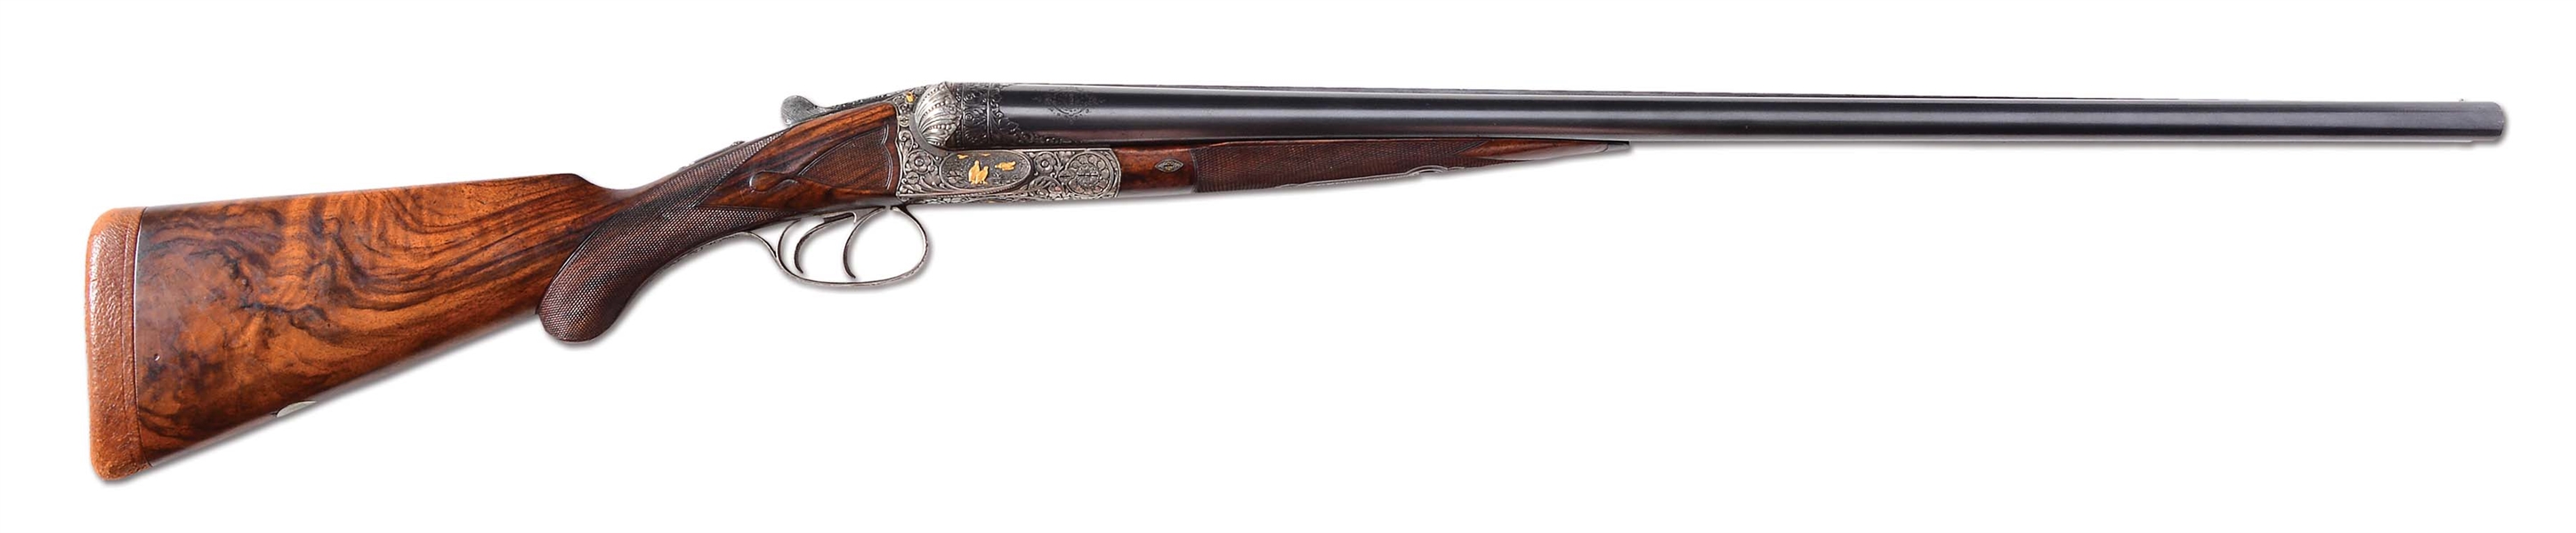 (A) CHARLES DALY DIAMOND QUALITY 12 GAUGE SXS SHOTGUN. WITH TRULY EXCEPTIONAL DEEP RELIEF ENGRAVING AND ALMOST THREE DIMENSIONAL GOLD INLAID DOGS AND BIRDS. 